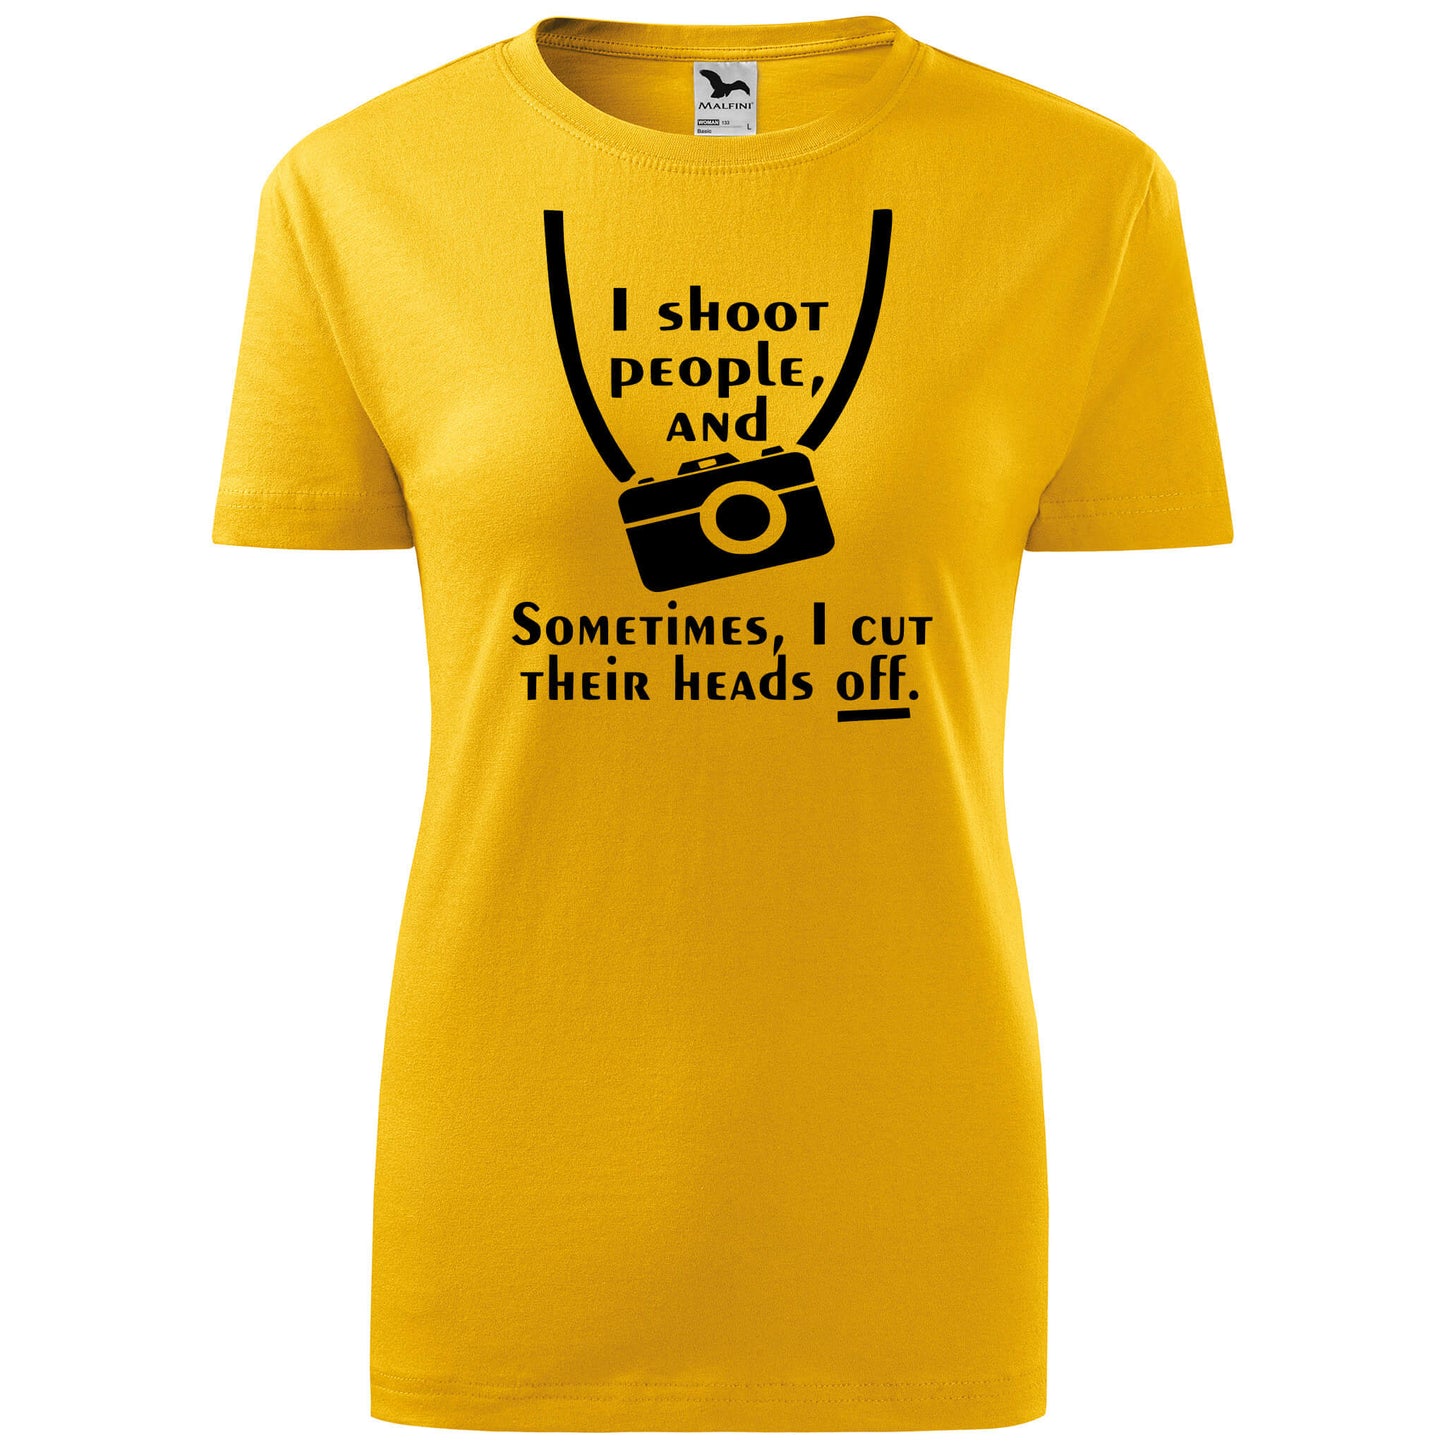 T-shirt - I shoot people and sometimes cut their head off - rvdesignprint